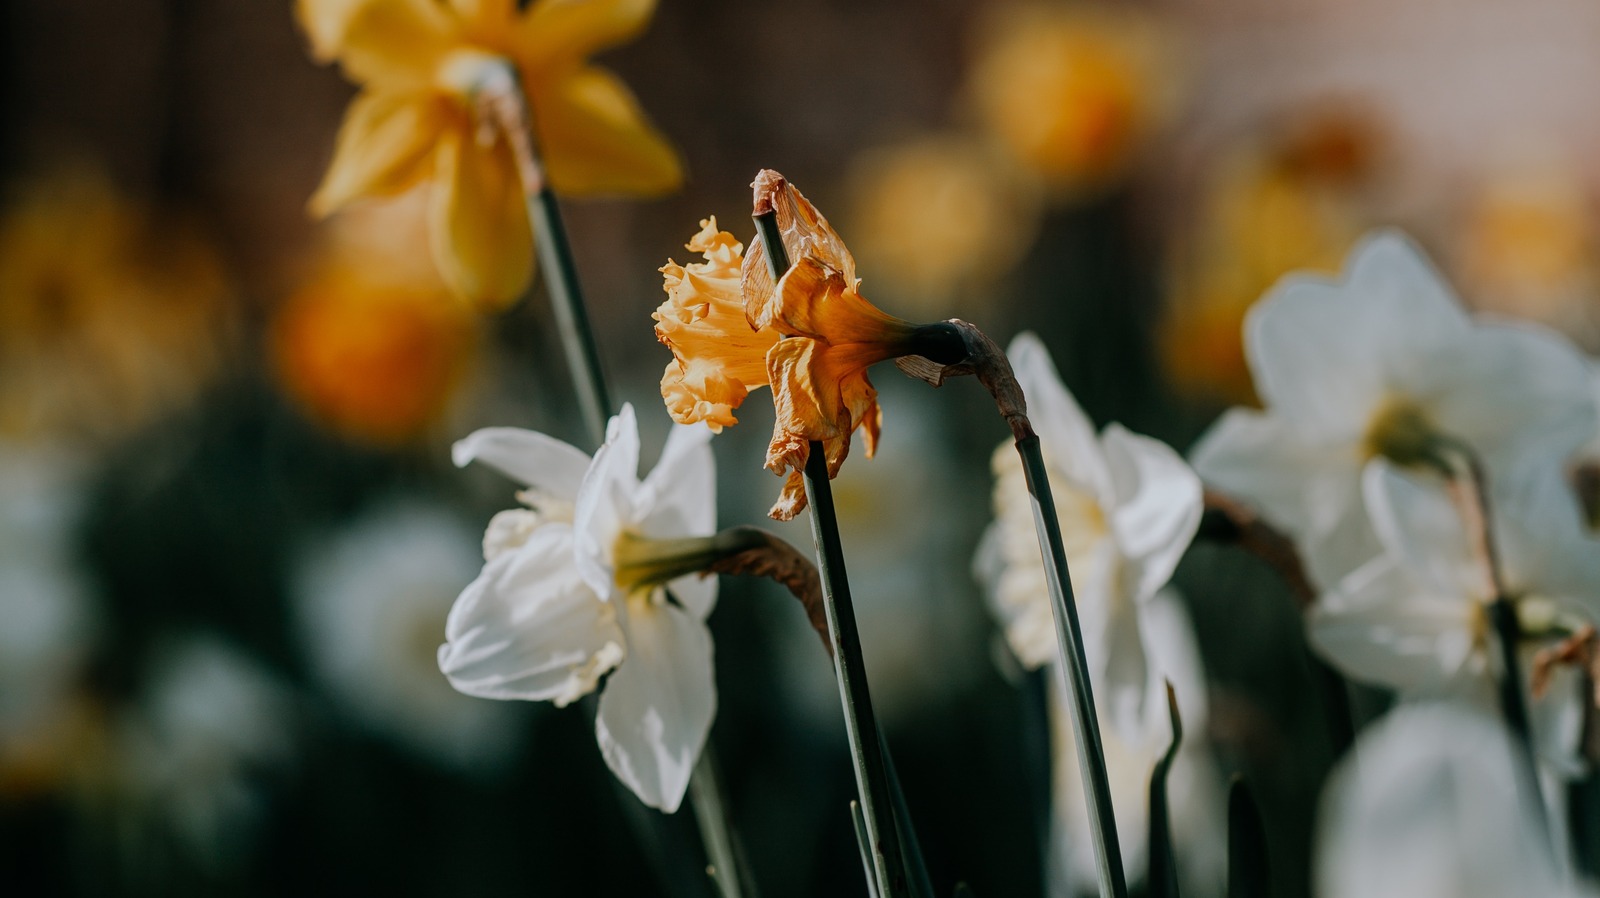 How And When To Deadhead Daffodils